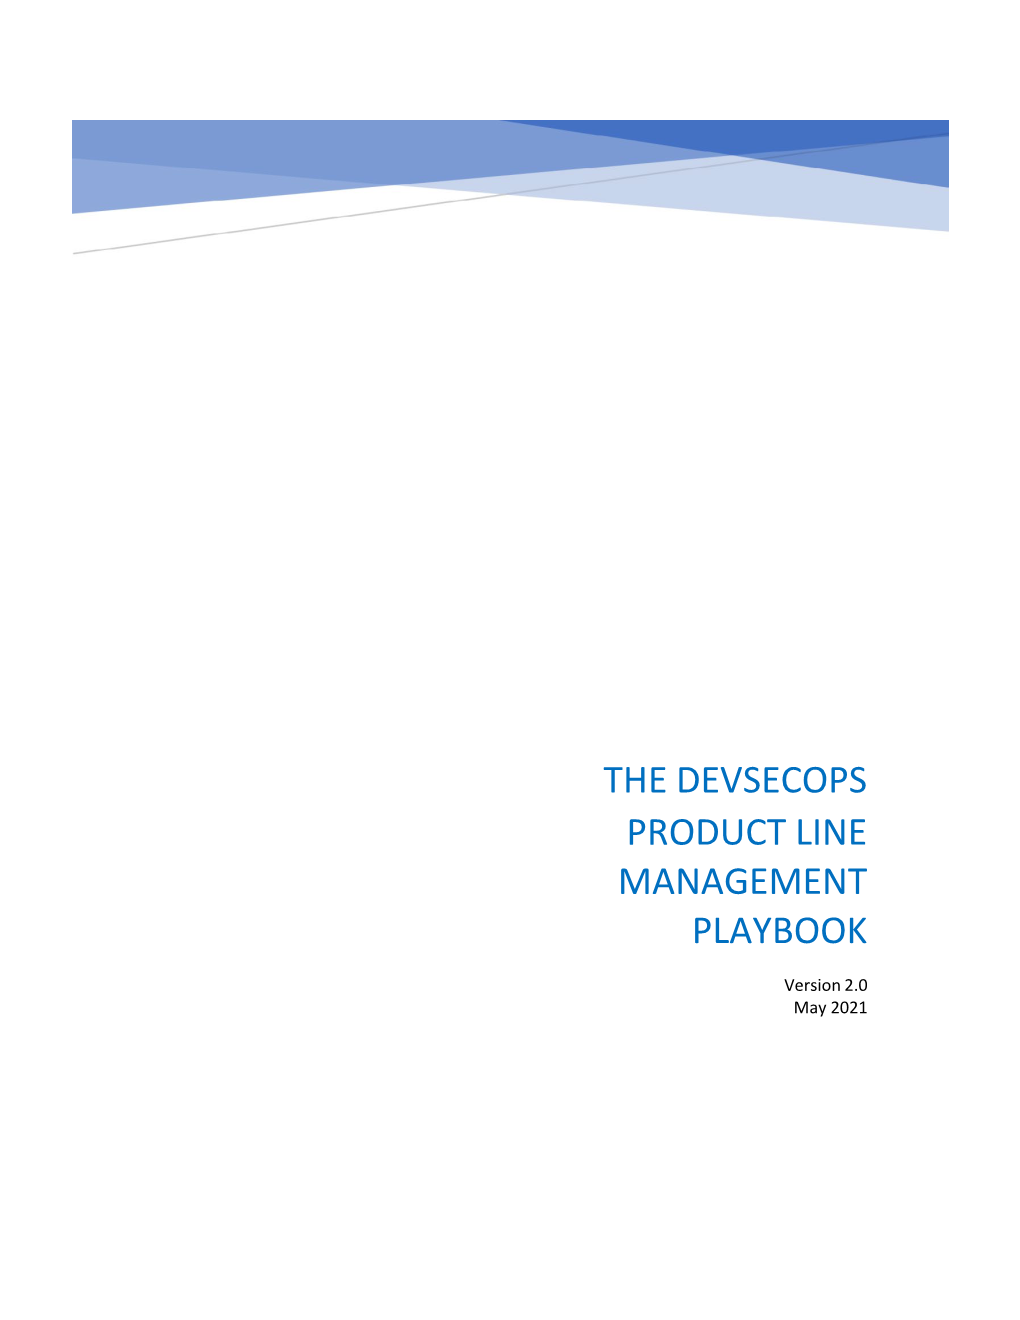 The Devsecops Product Line Management Playbook